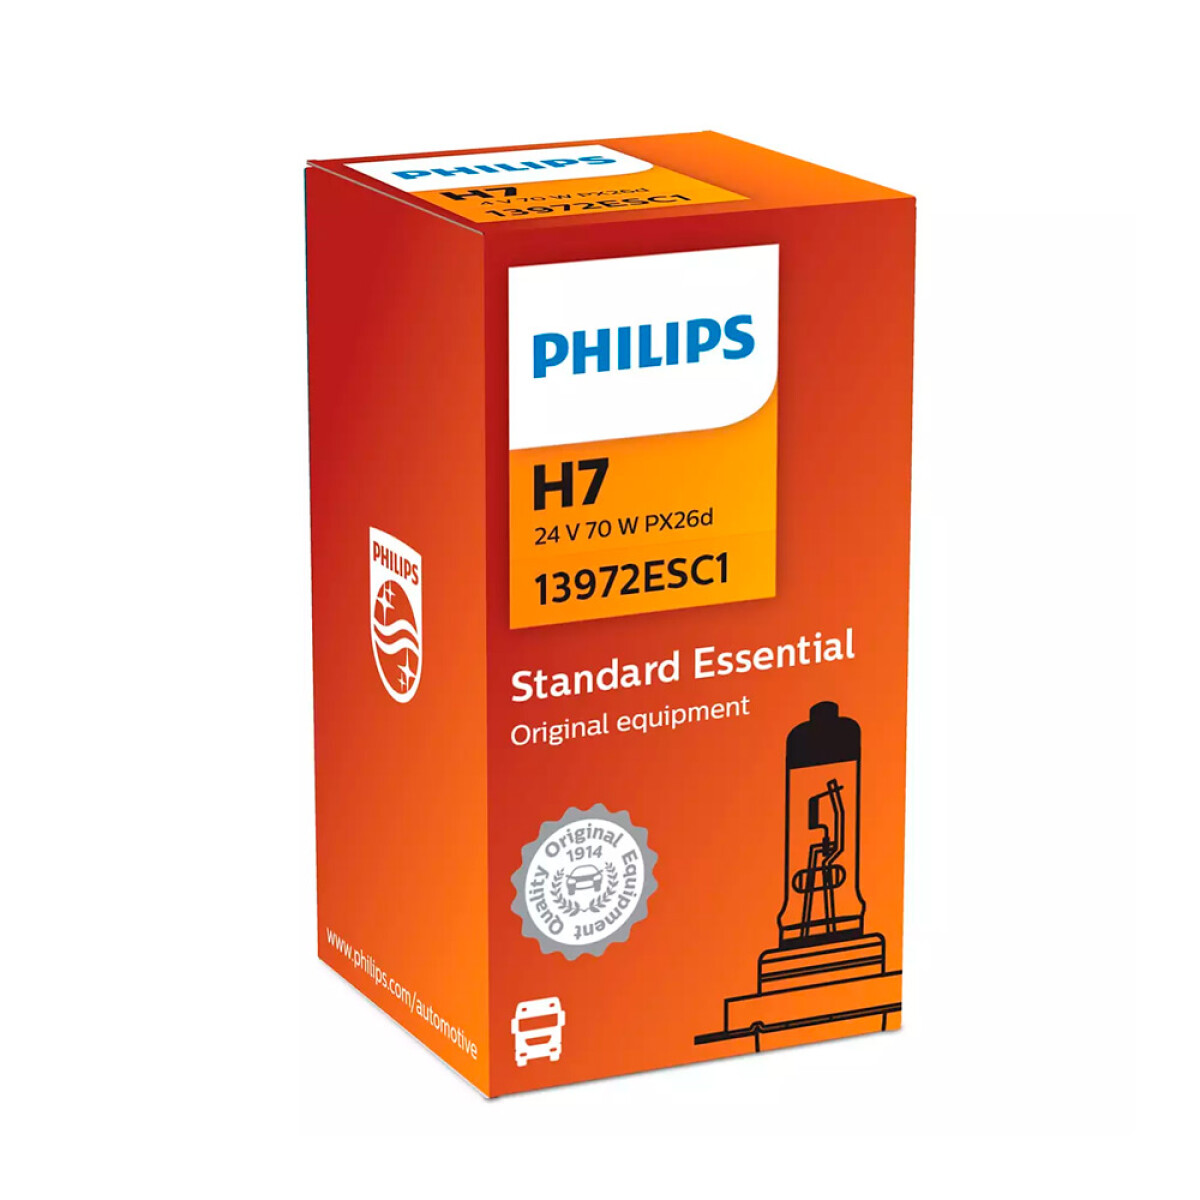 LAMPARA - HALOGENA H7 24V 70W PX26D ESSENTIAL PHILIPS 